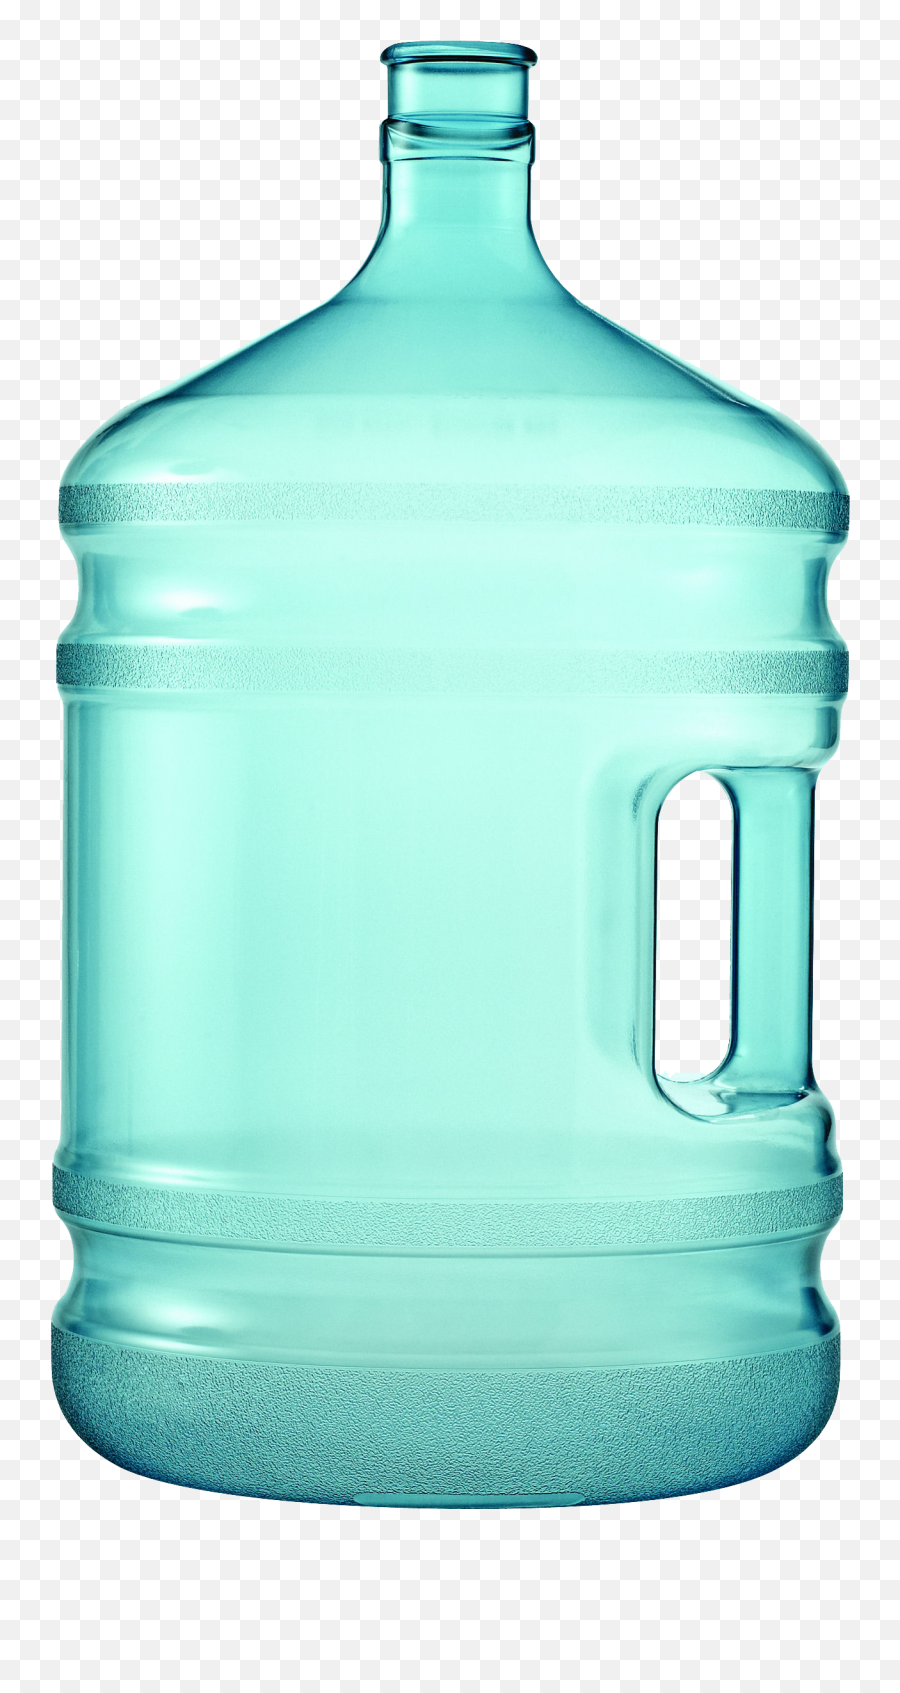 Water Bottle Transparent Png Image - Water Bottle,Water Bottle Transparent Background